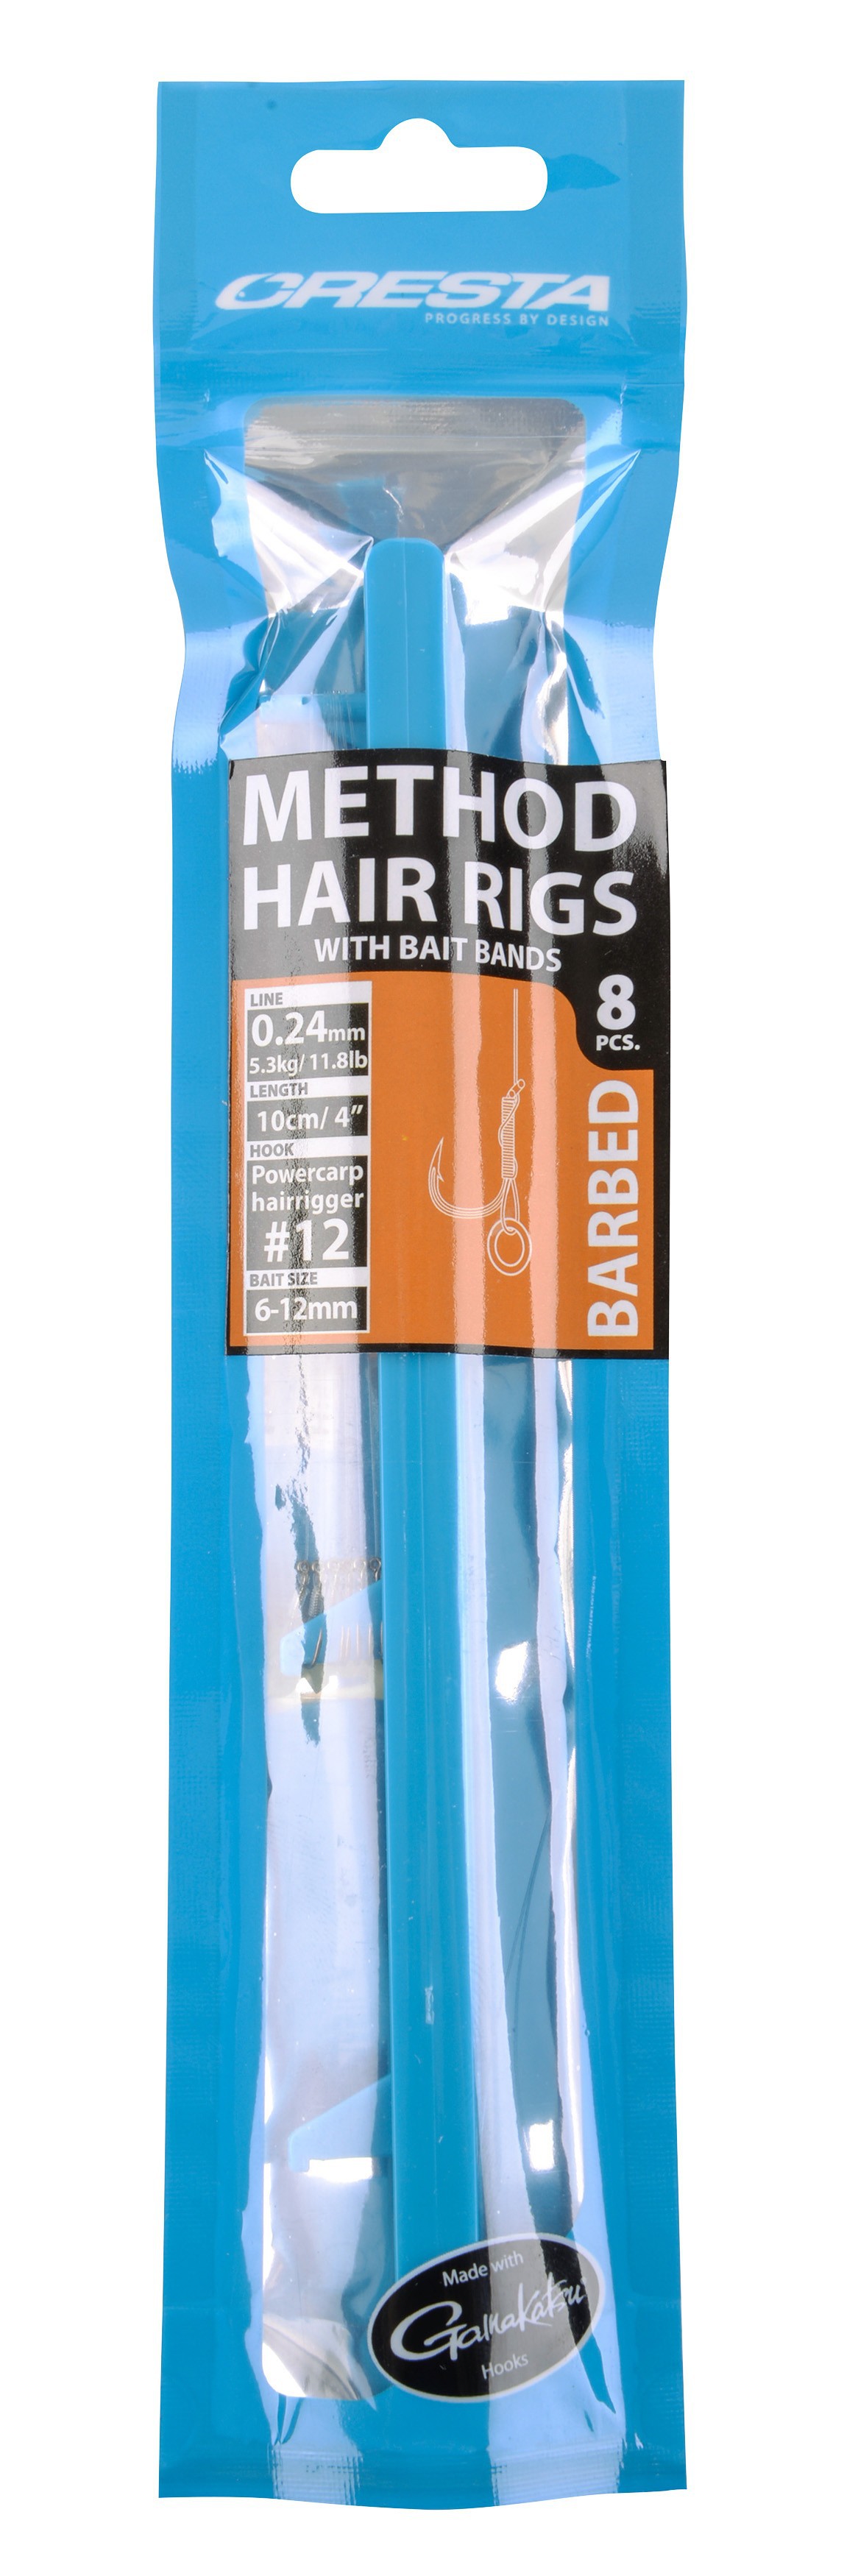 Spro - Cresta Method Hair Rigs With Bait Bands Barbed 4" – 10 cm Size 12